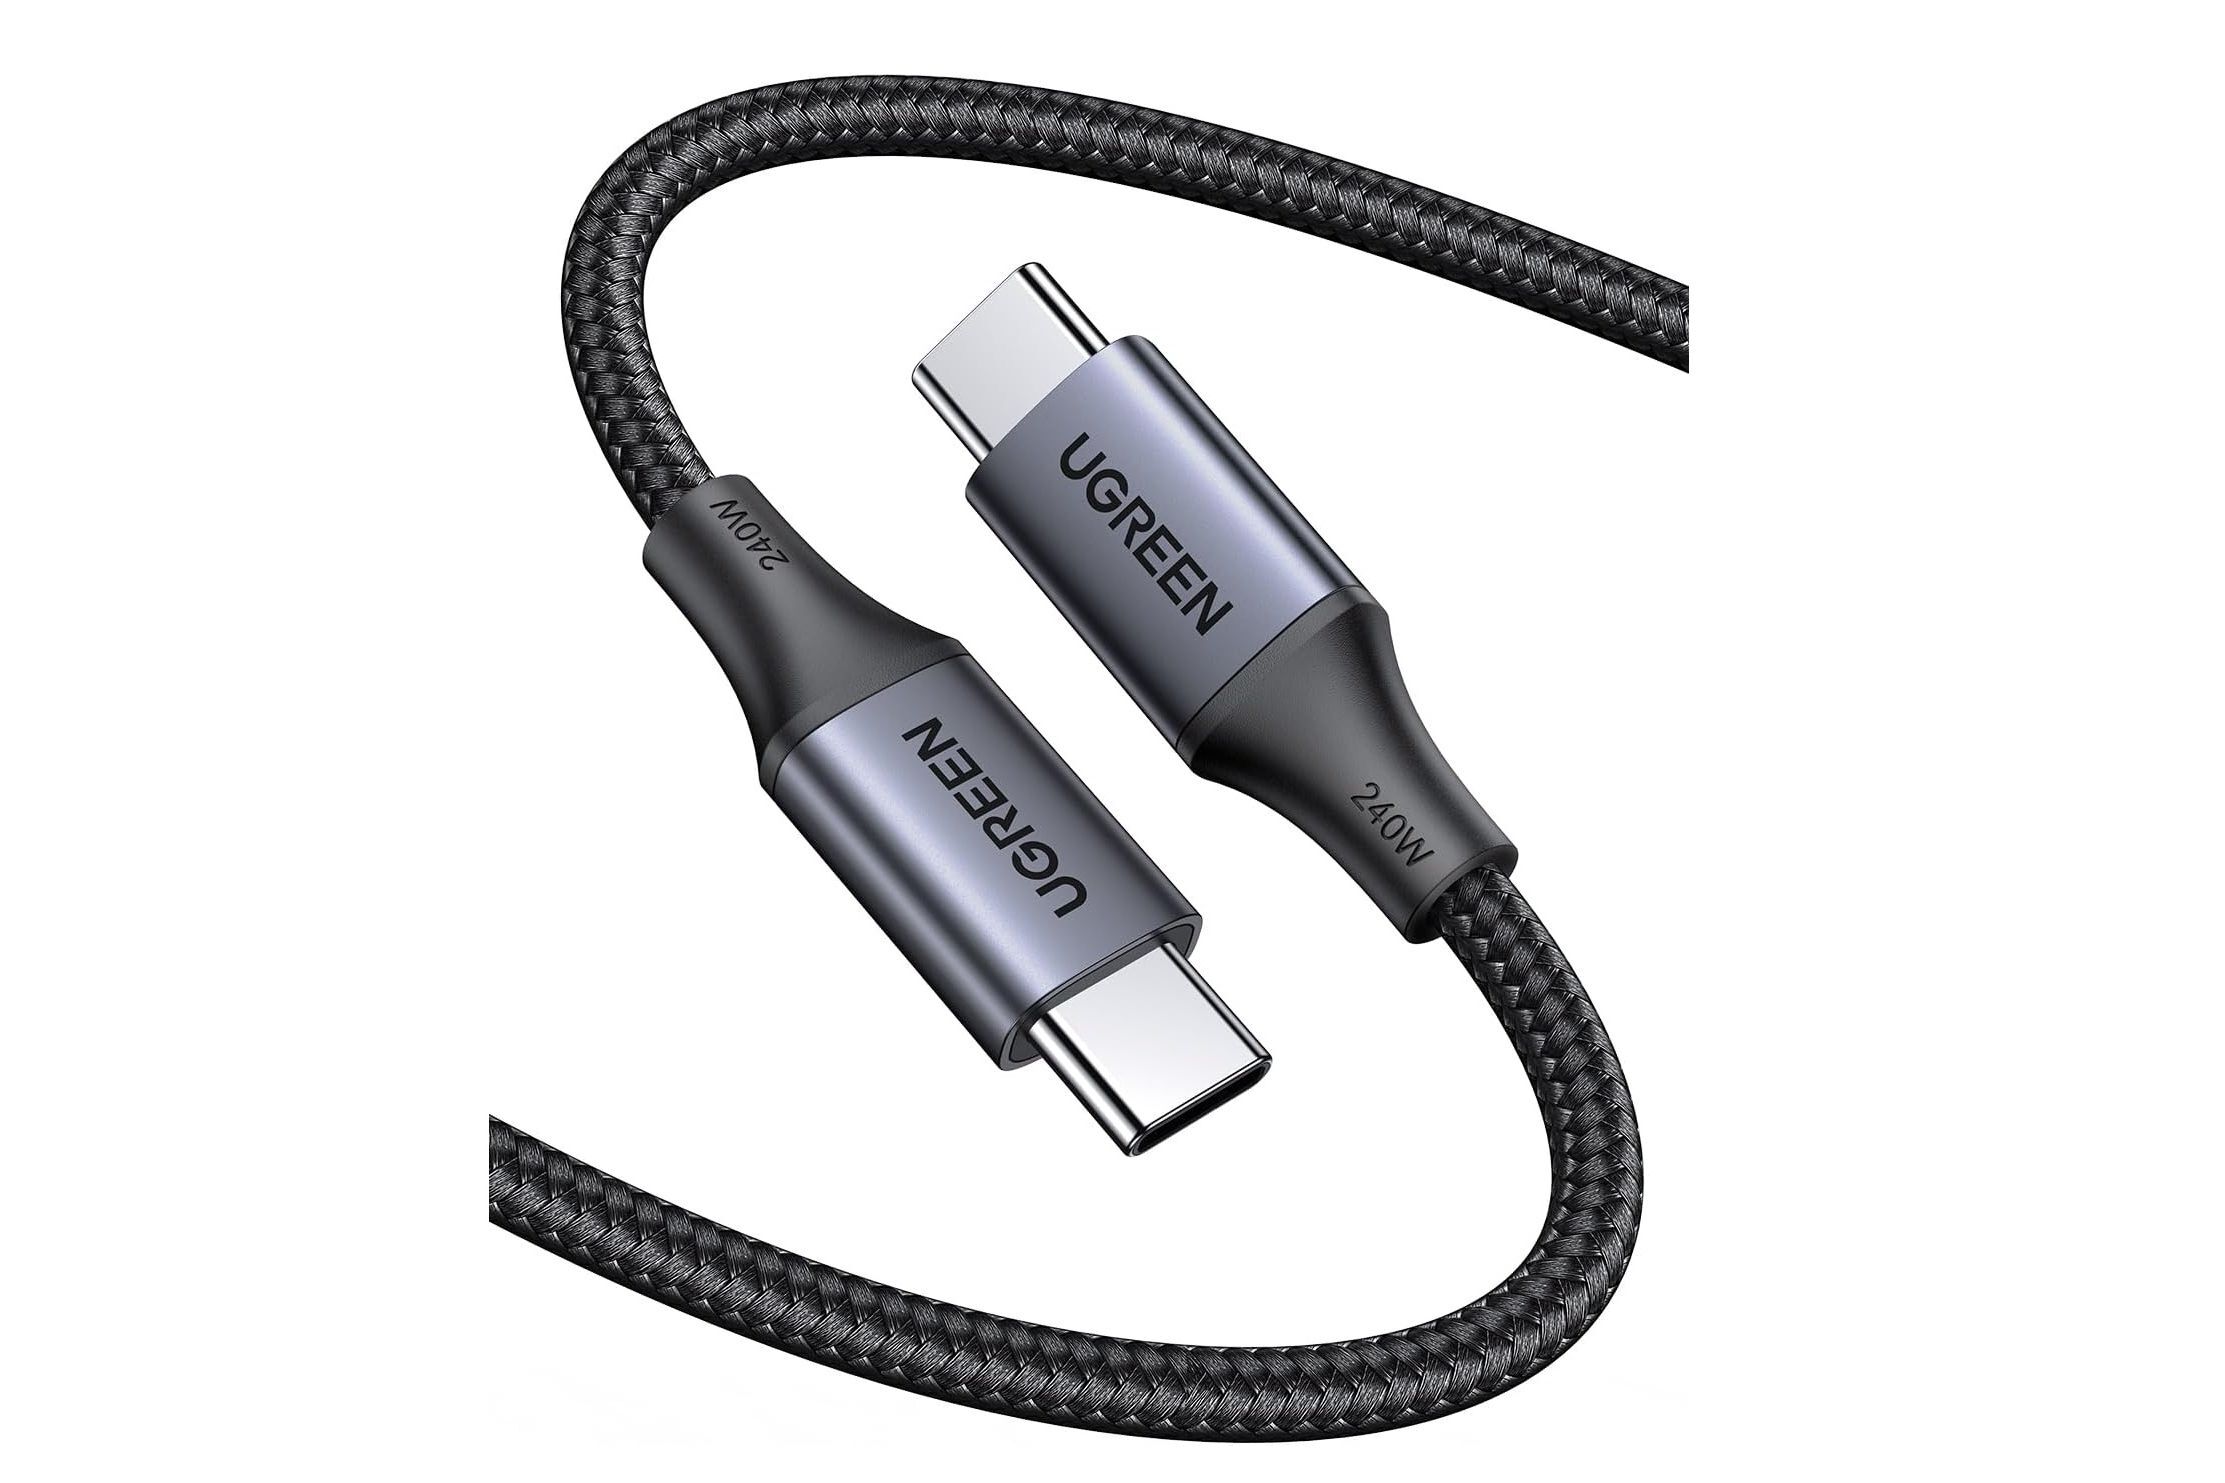 Exciting new Apple iPhone 15 upgrade coming - USB Type-C cable